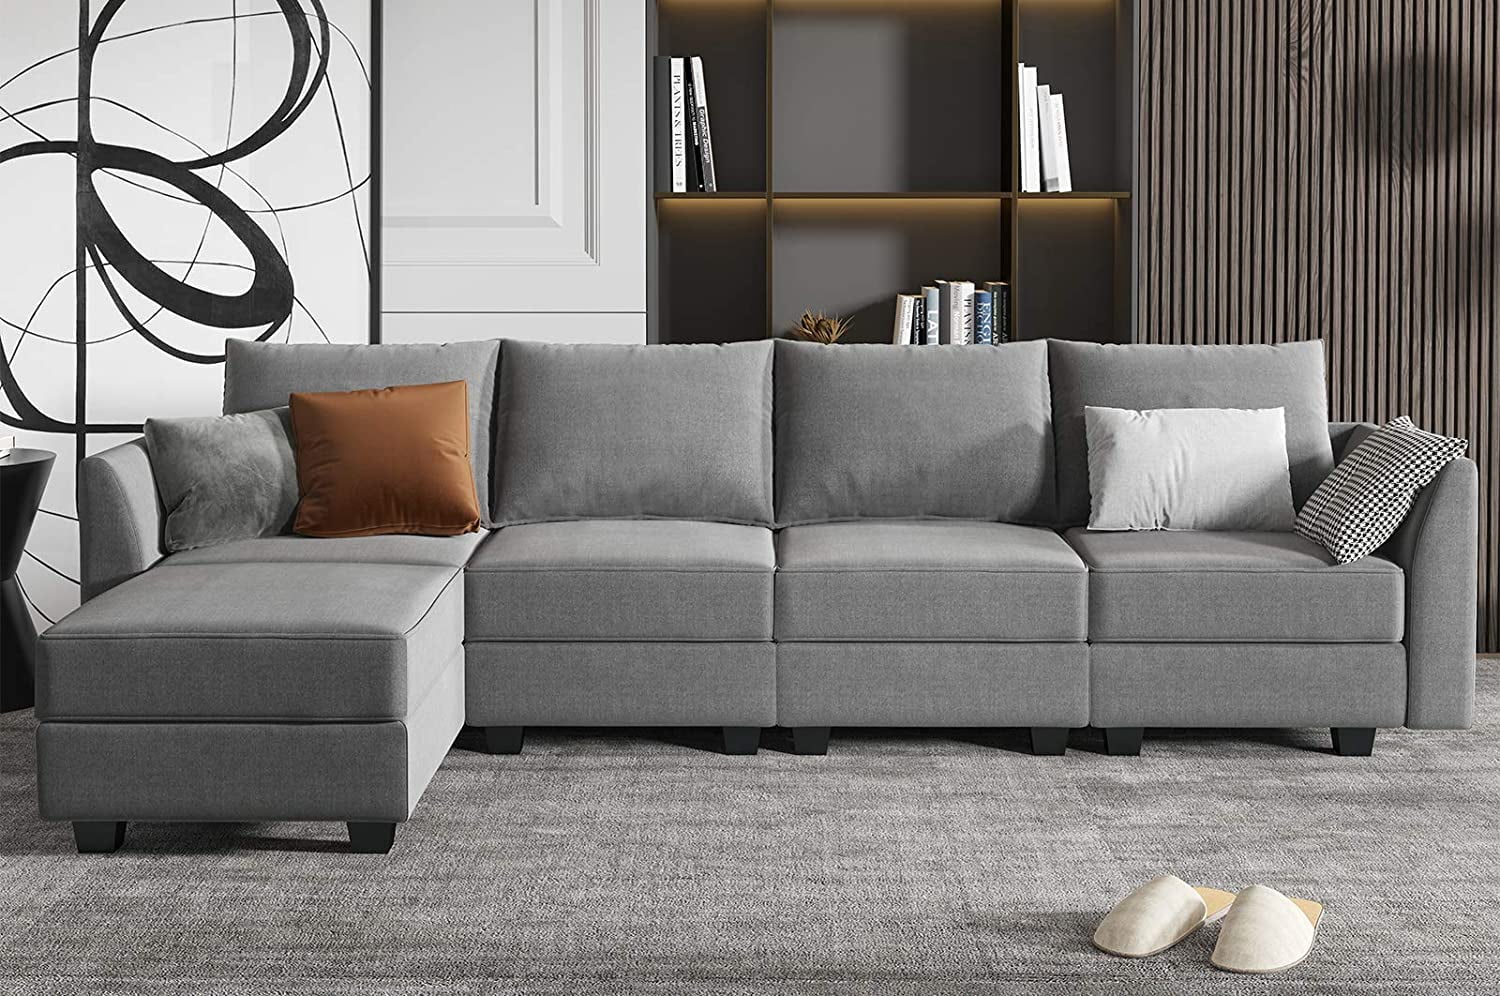 HONBAY Modular Sectional Couch with Reversible Chaise L-Shape Sofa 4 ...